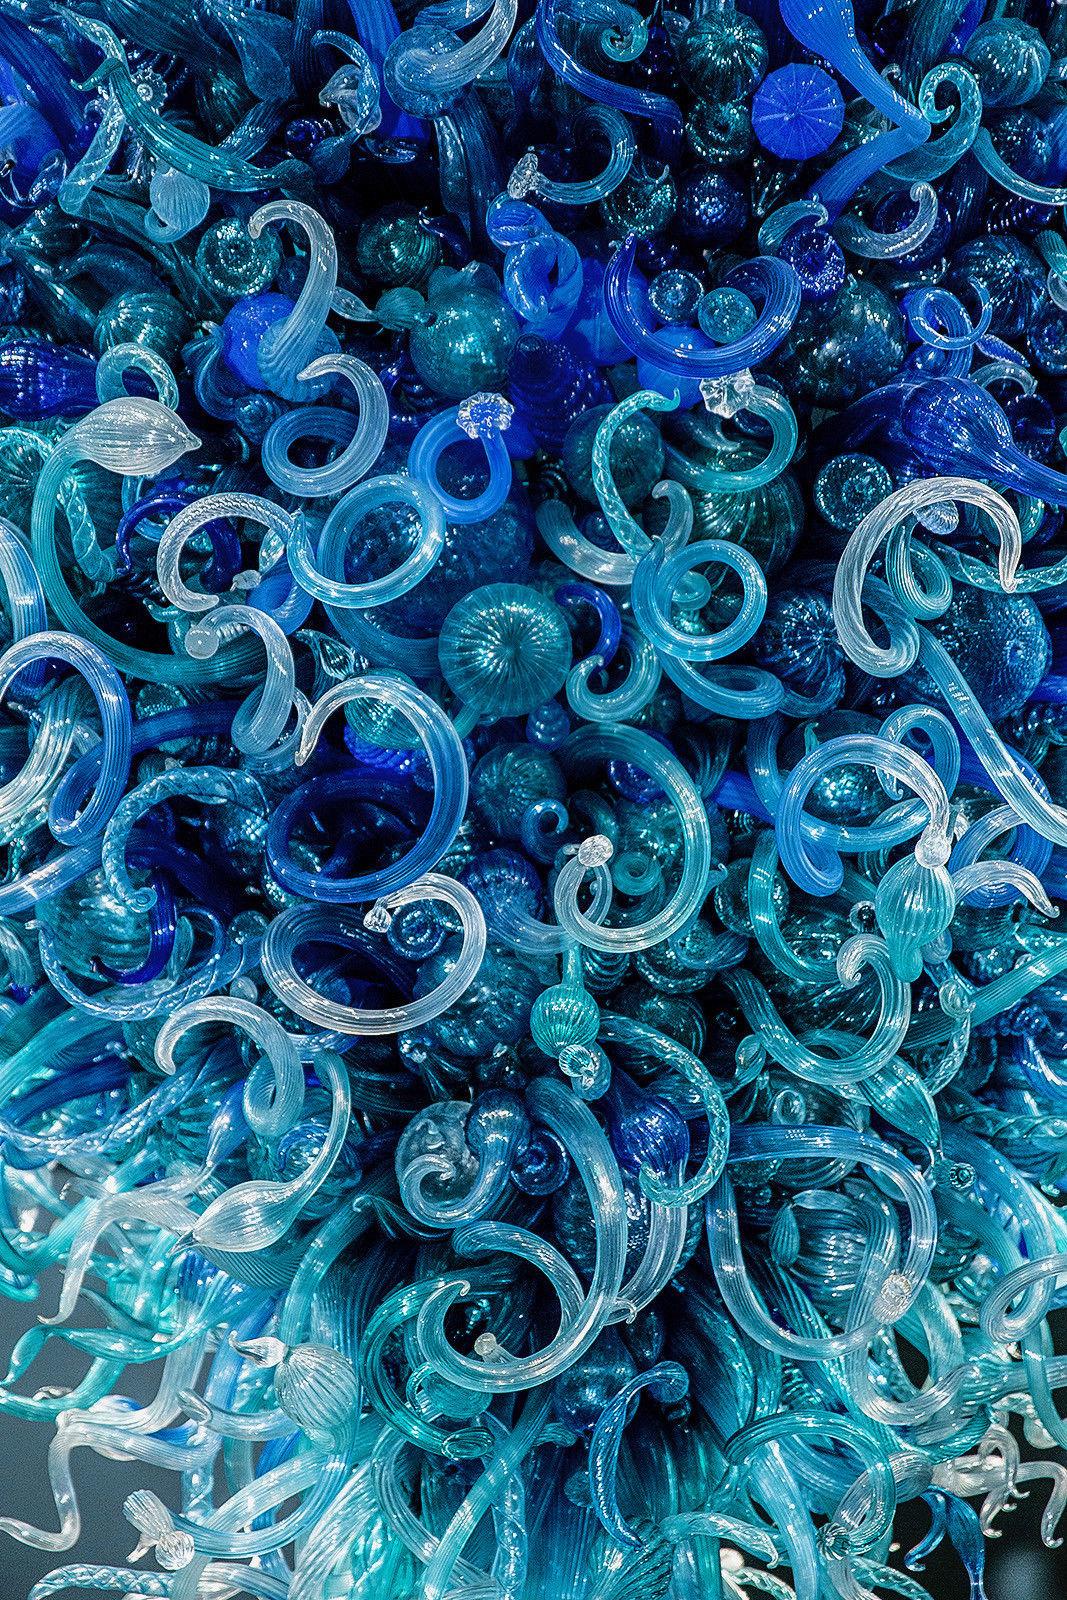 Artist: Dale Chihuly 
Description: Blue Turquoise blown glass
Medium: Hand Blown Glass Chandelier
Size: 144 x 144 in.
Studio Number: Given upon Request
Year: 2004
2000+ Glass pieces
We can help with engineering your site and also assist in lighting.